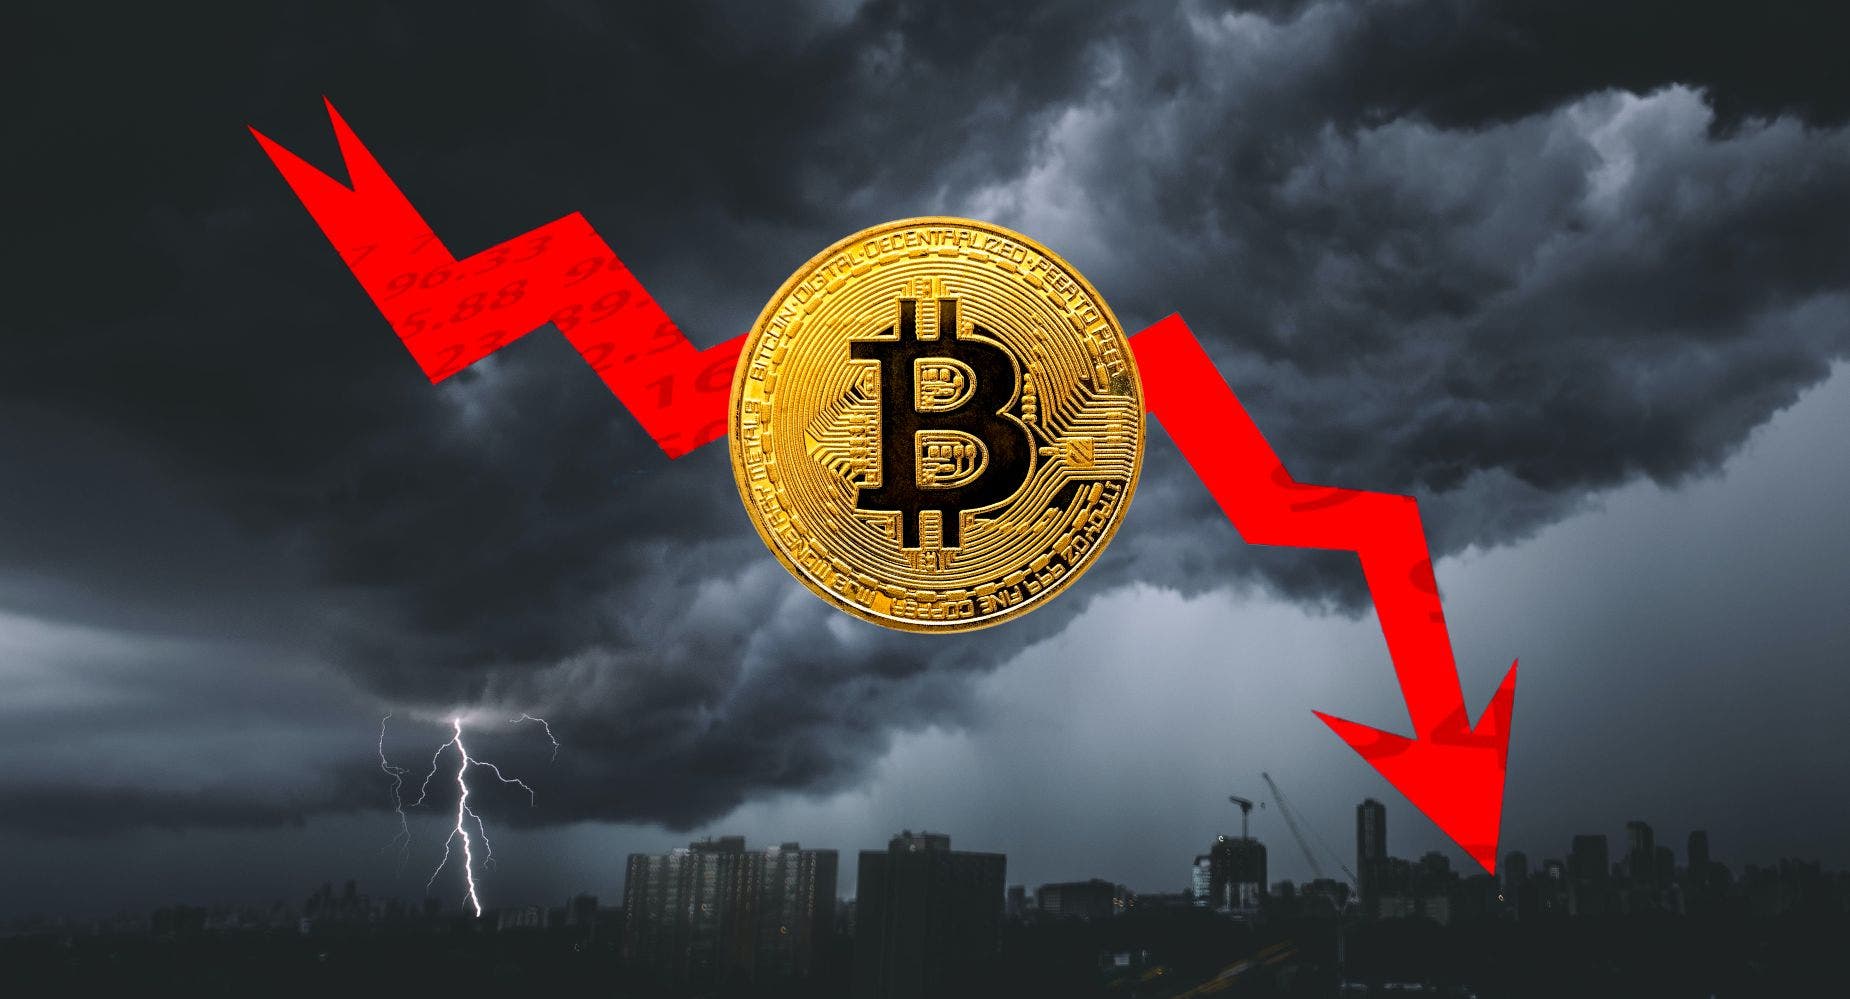 Analysts Say Crypto Markets Have Not Yet Bottomed Out, More 'Time Pain' Ahead